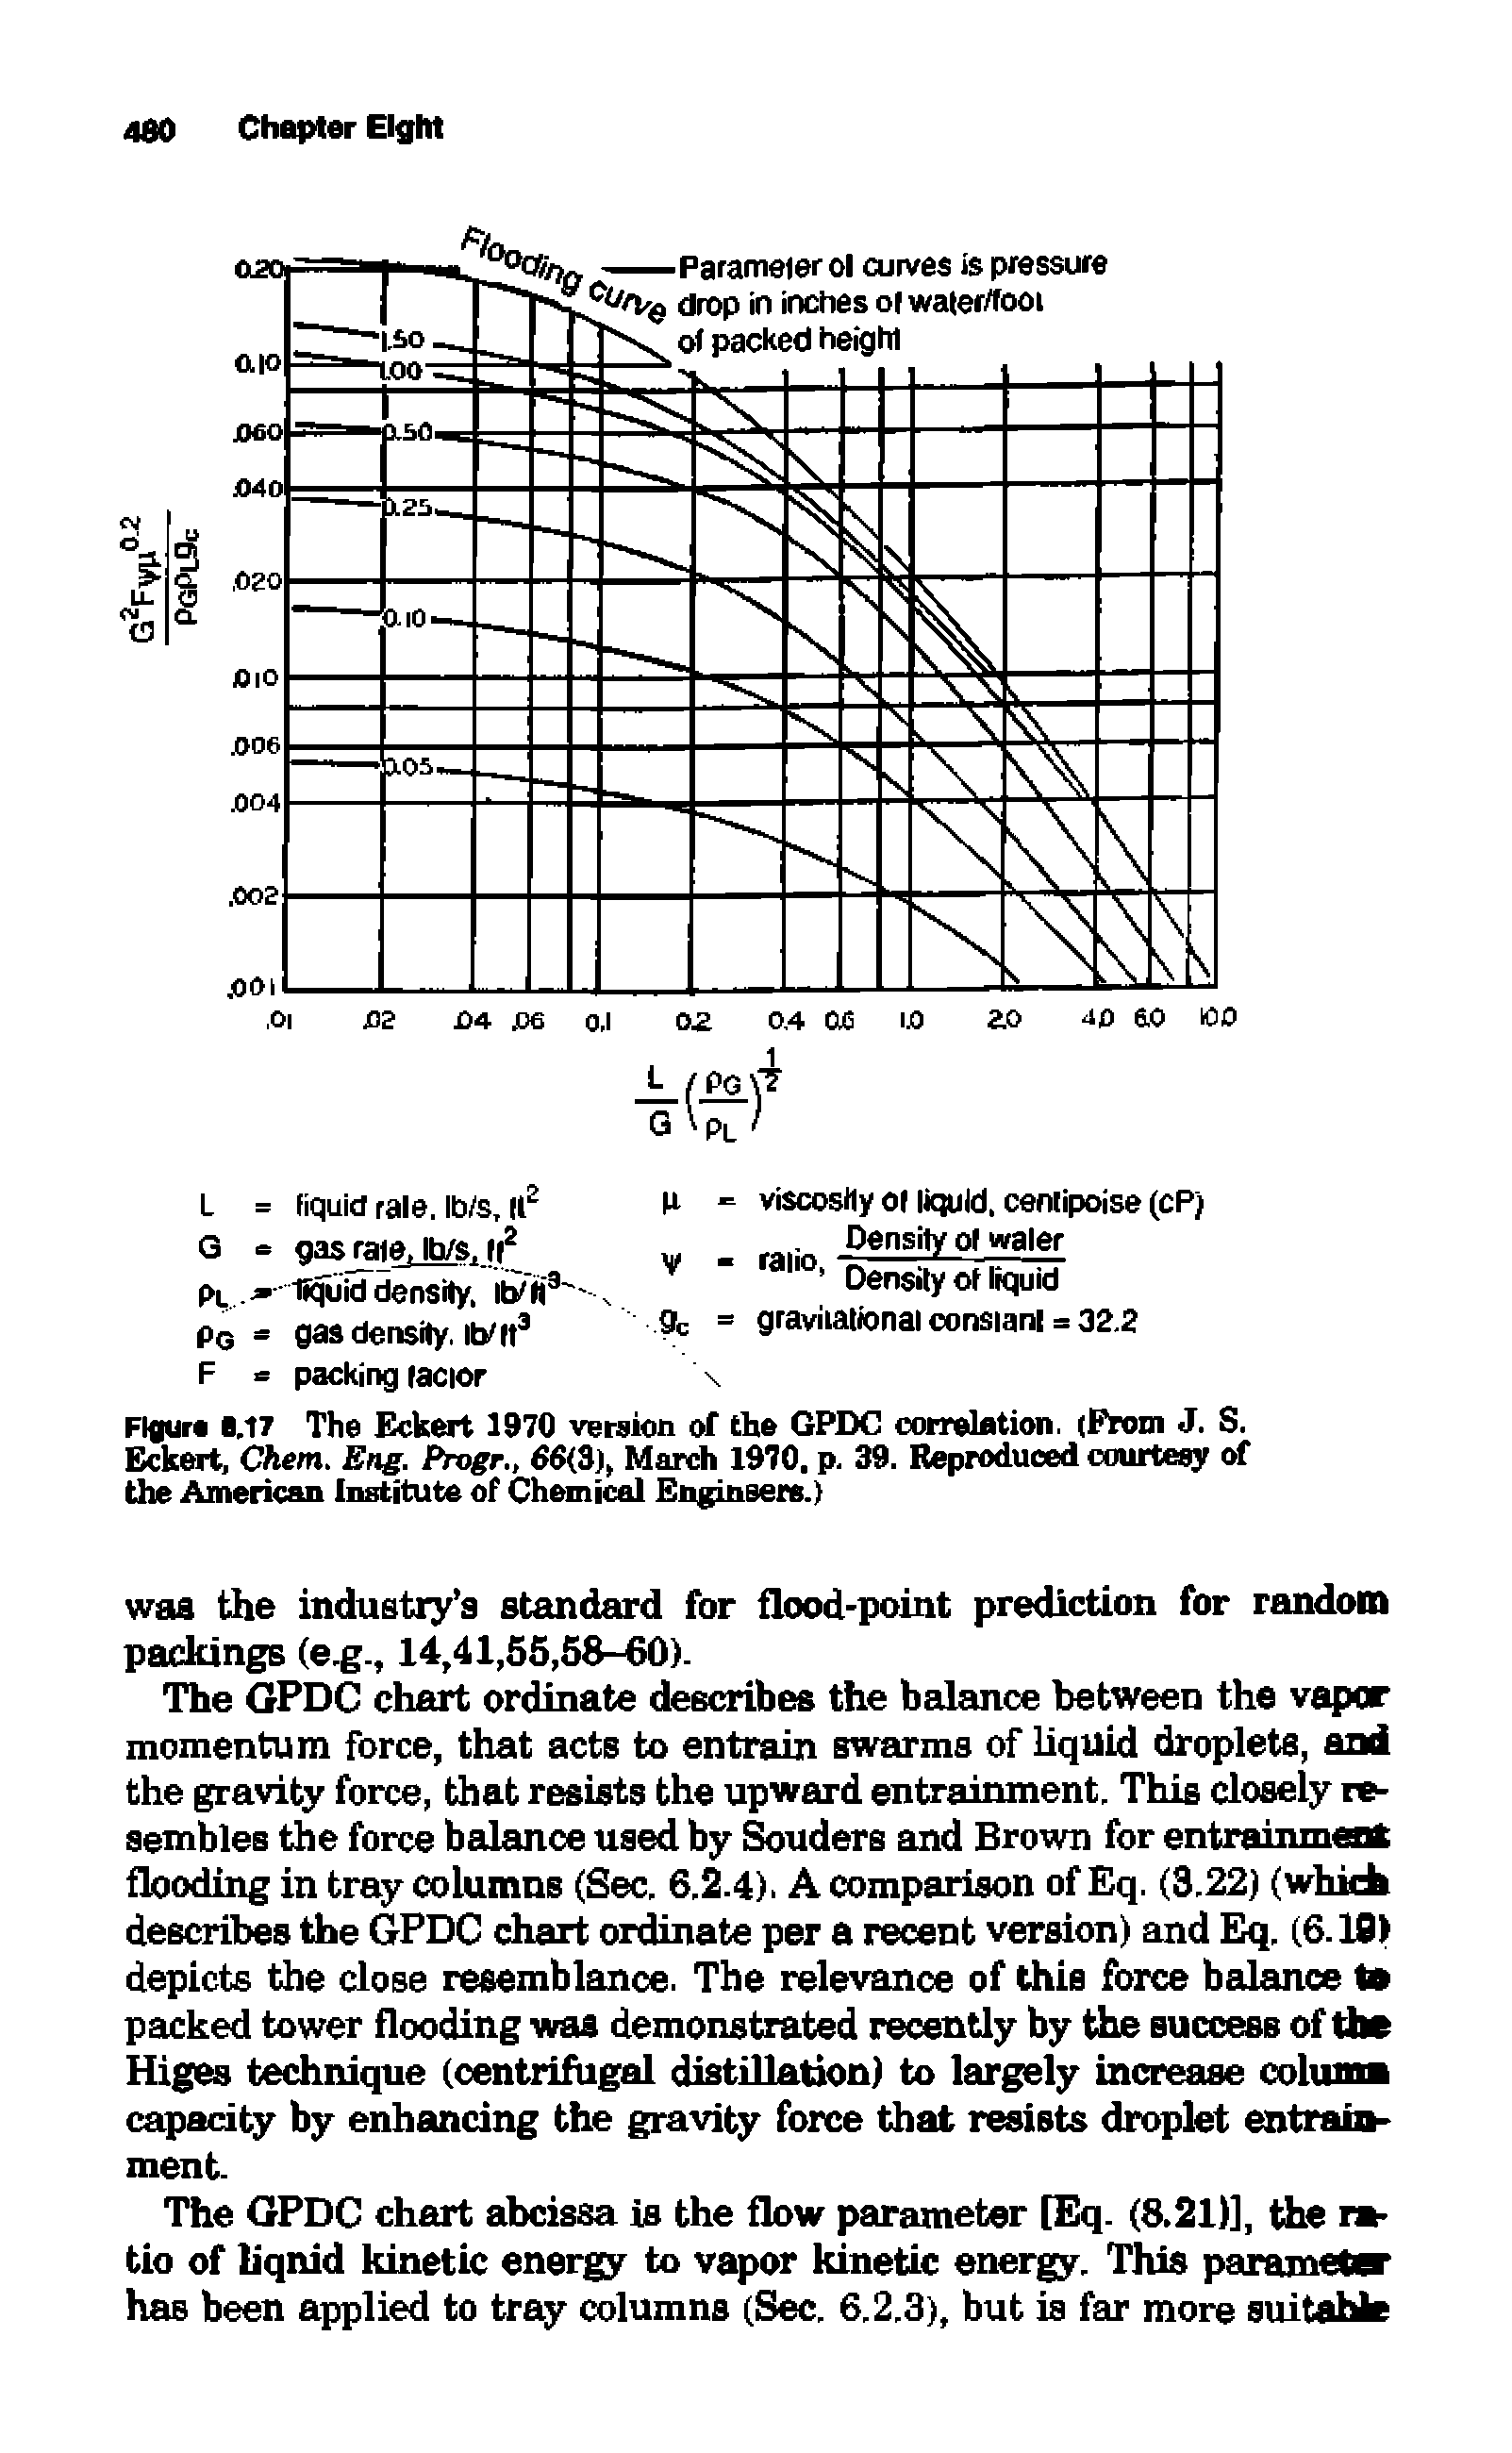 Figure B.17 The Eckert 1970 version of the GPDC correlation. (From J. S. Eckert, Ckem. Eng. Progr., 66(3), March 1970, p. 39. Reproduced courtesy of the American Institute of Chemical Engineers.)...